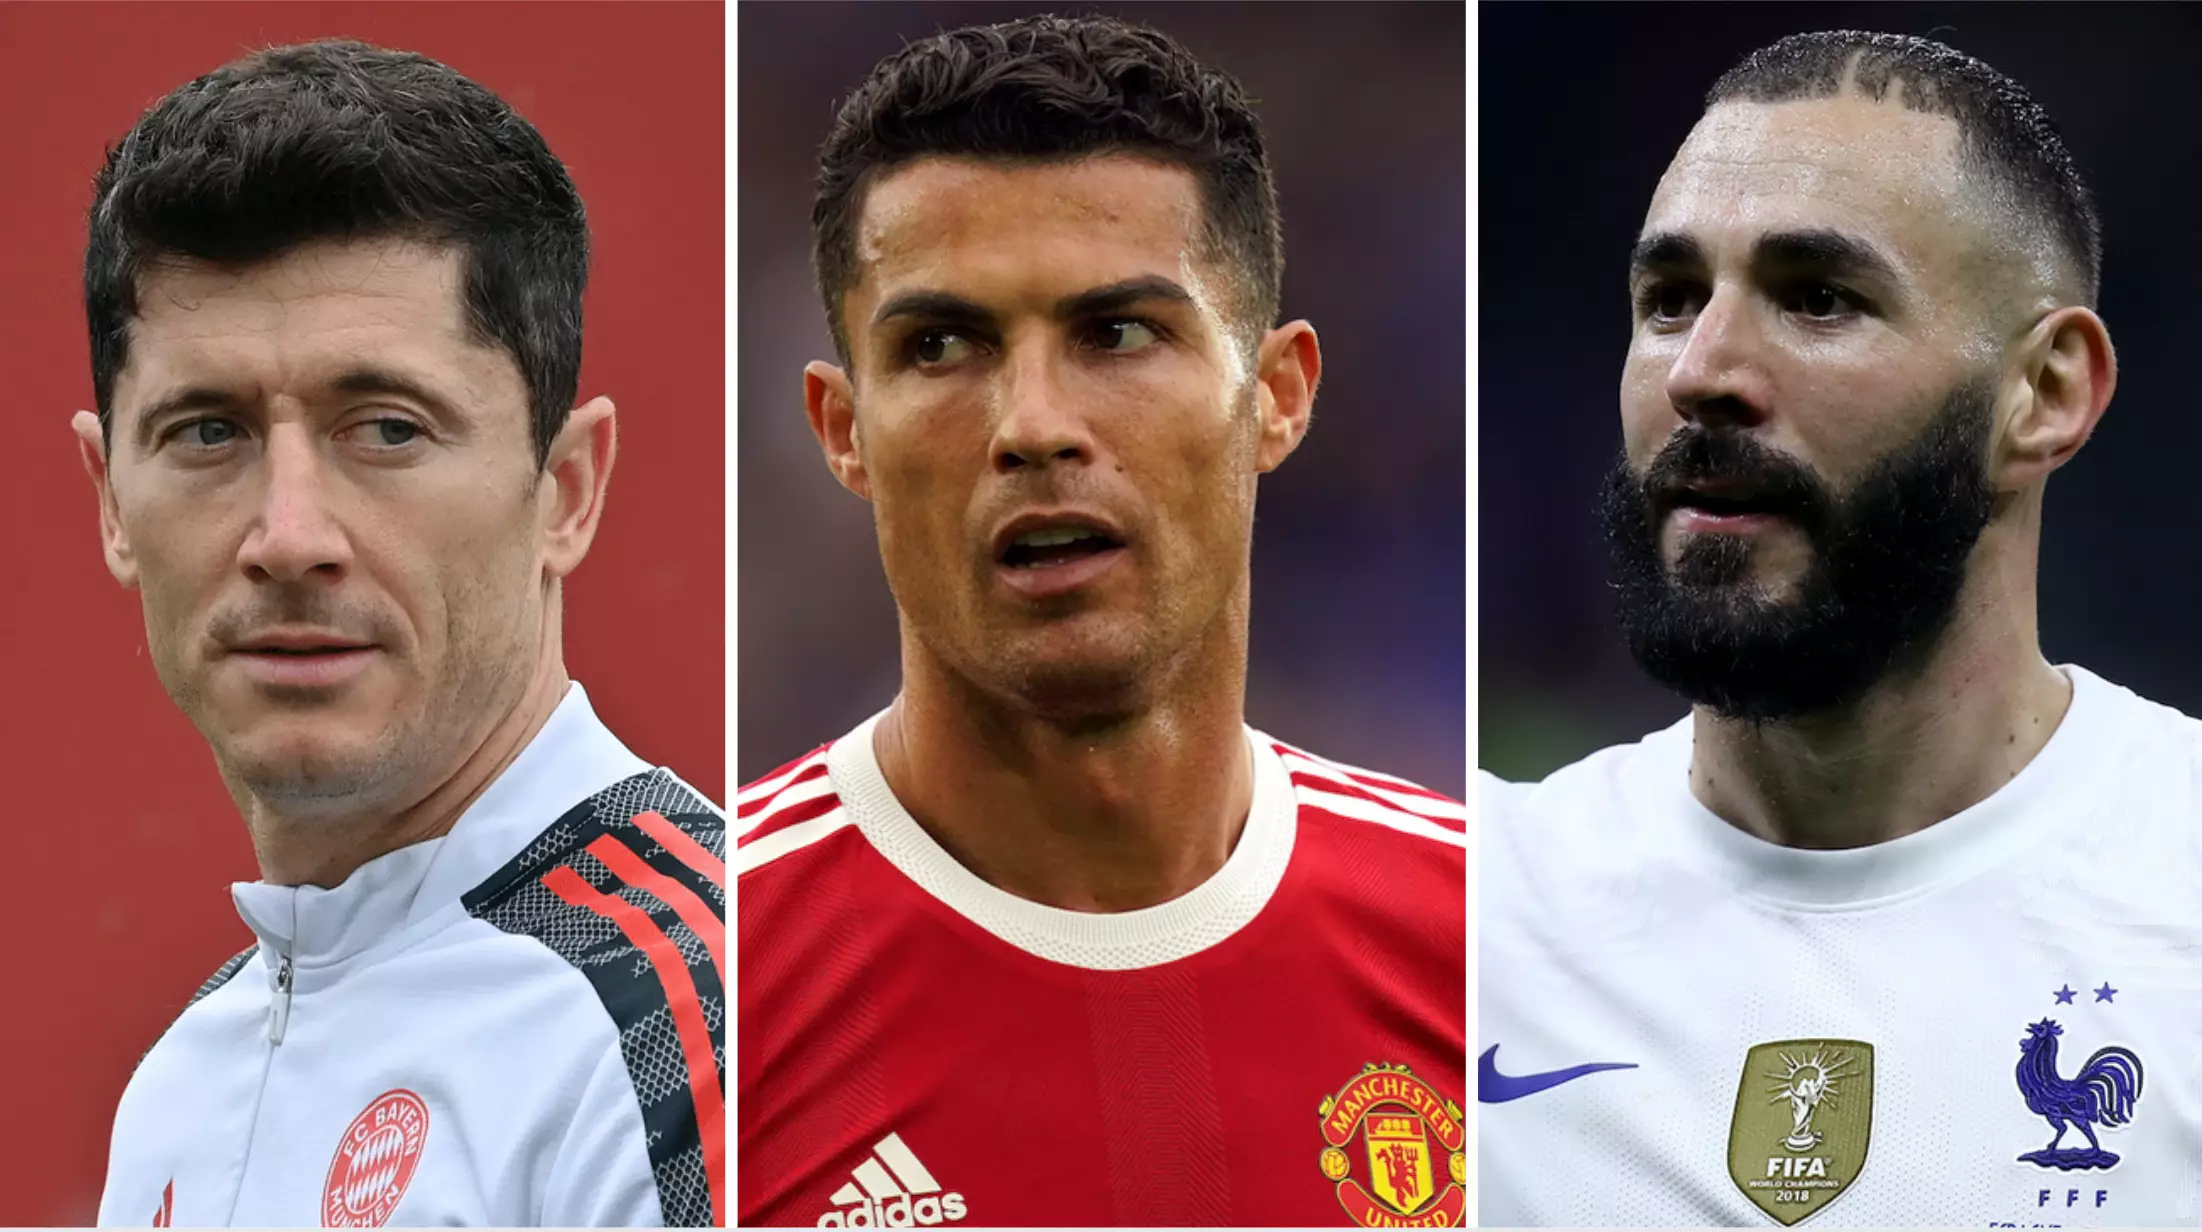 The Top 10 Best Strikers In The World Have Been Named And Ranked